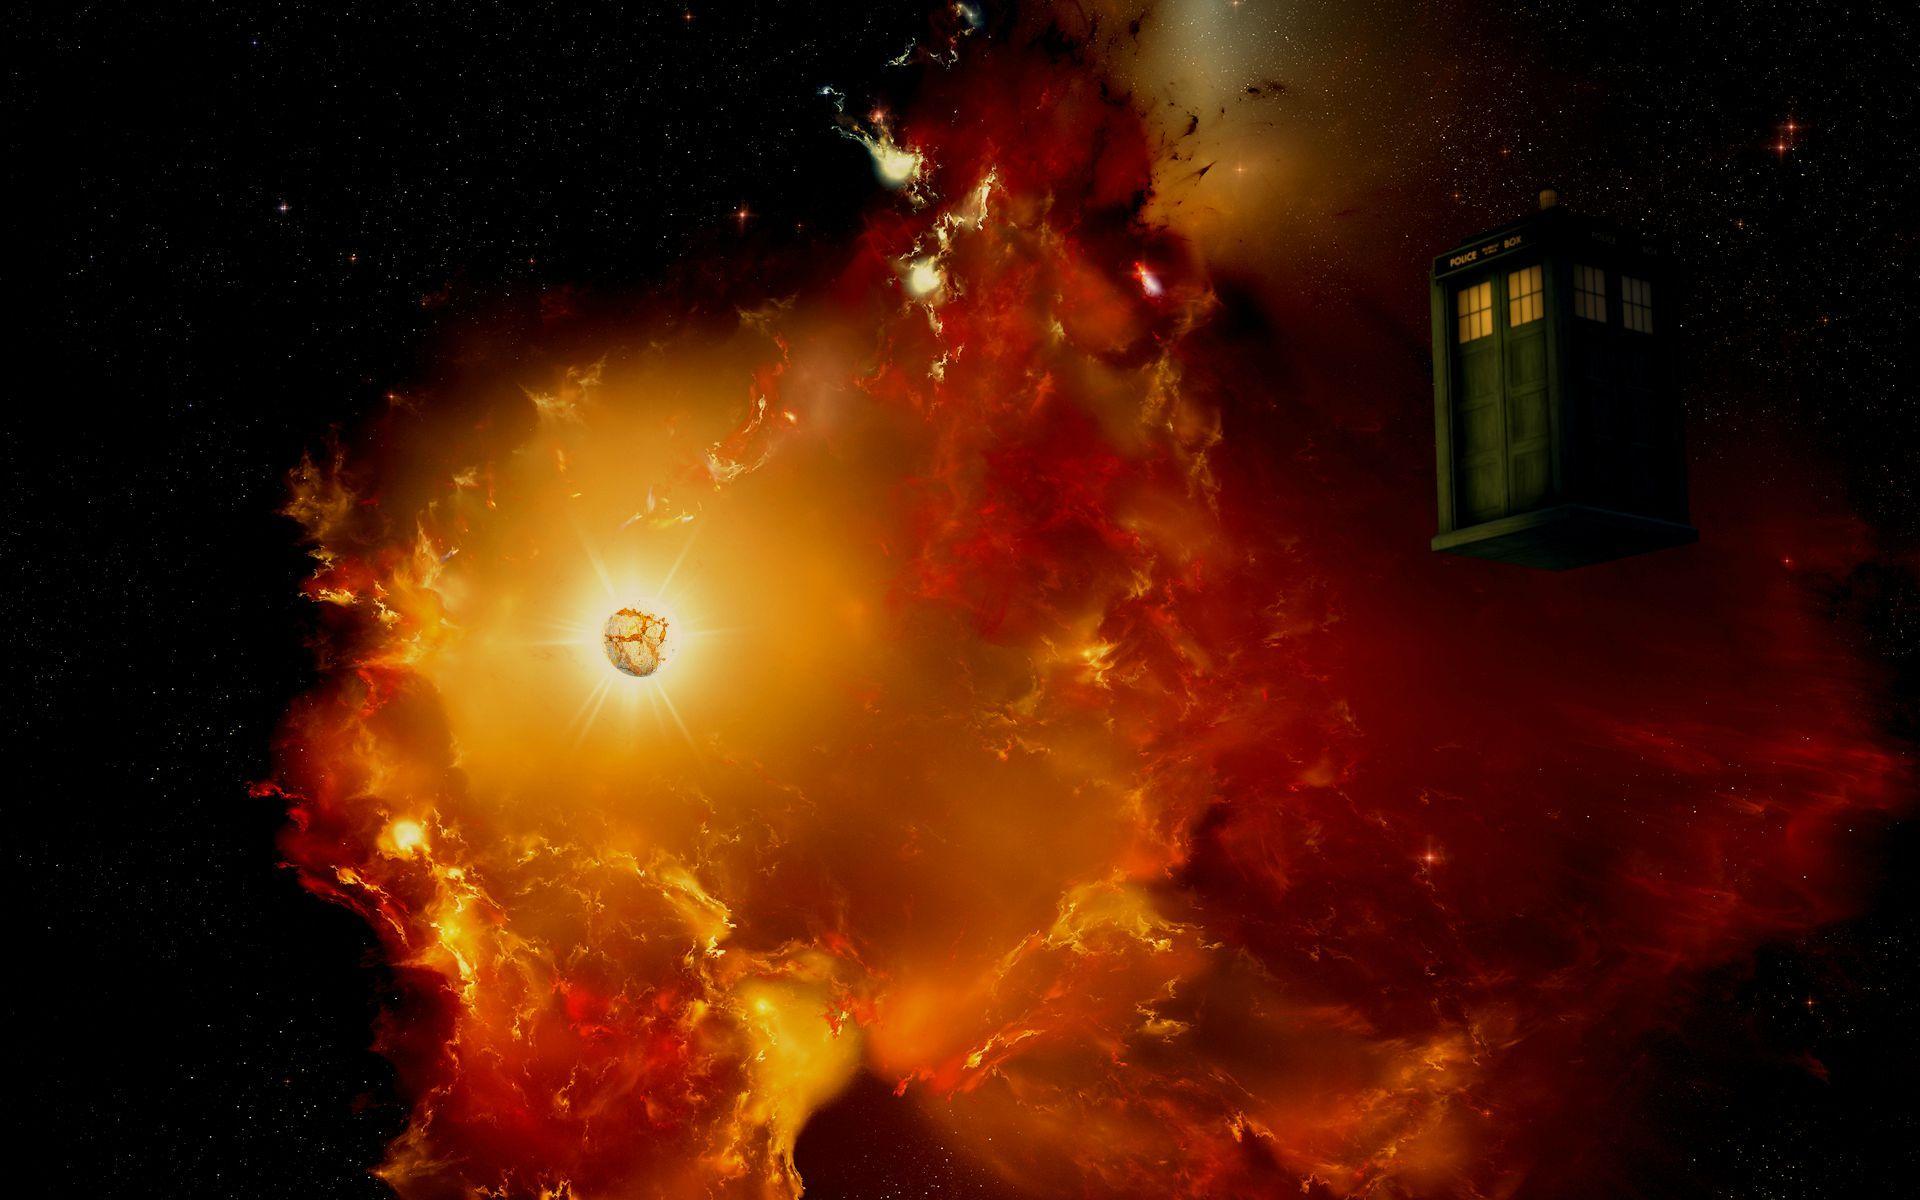 The End of Gallifrey